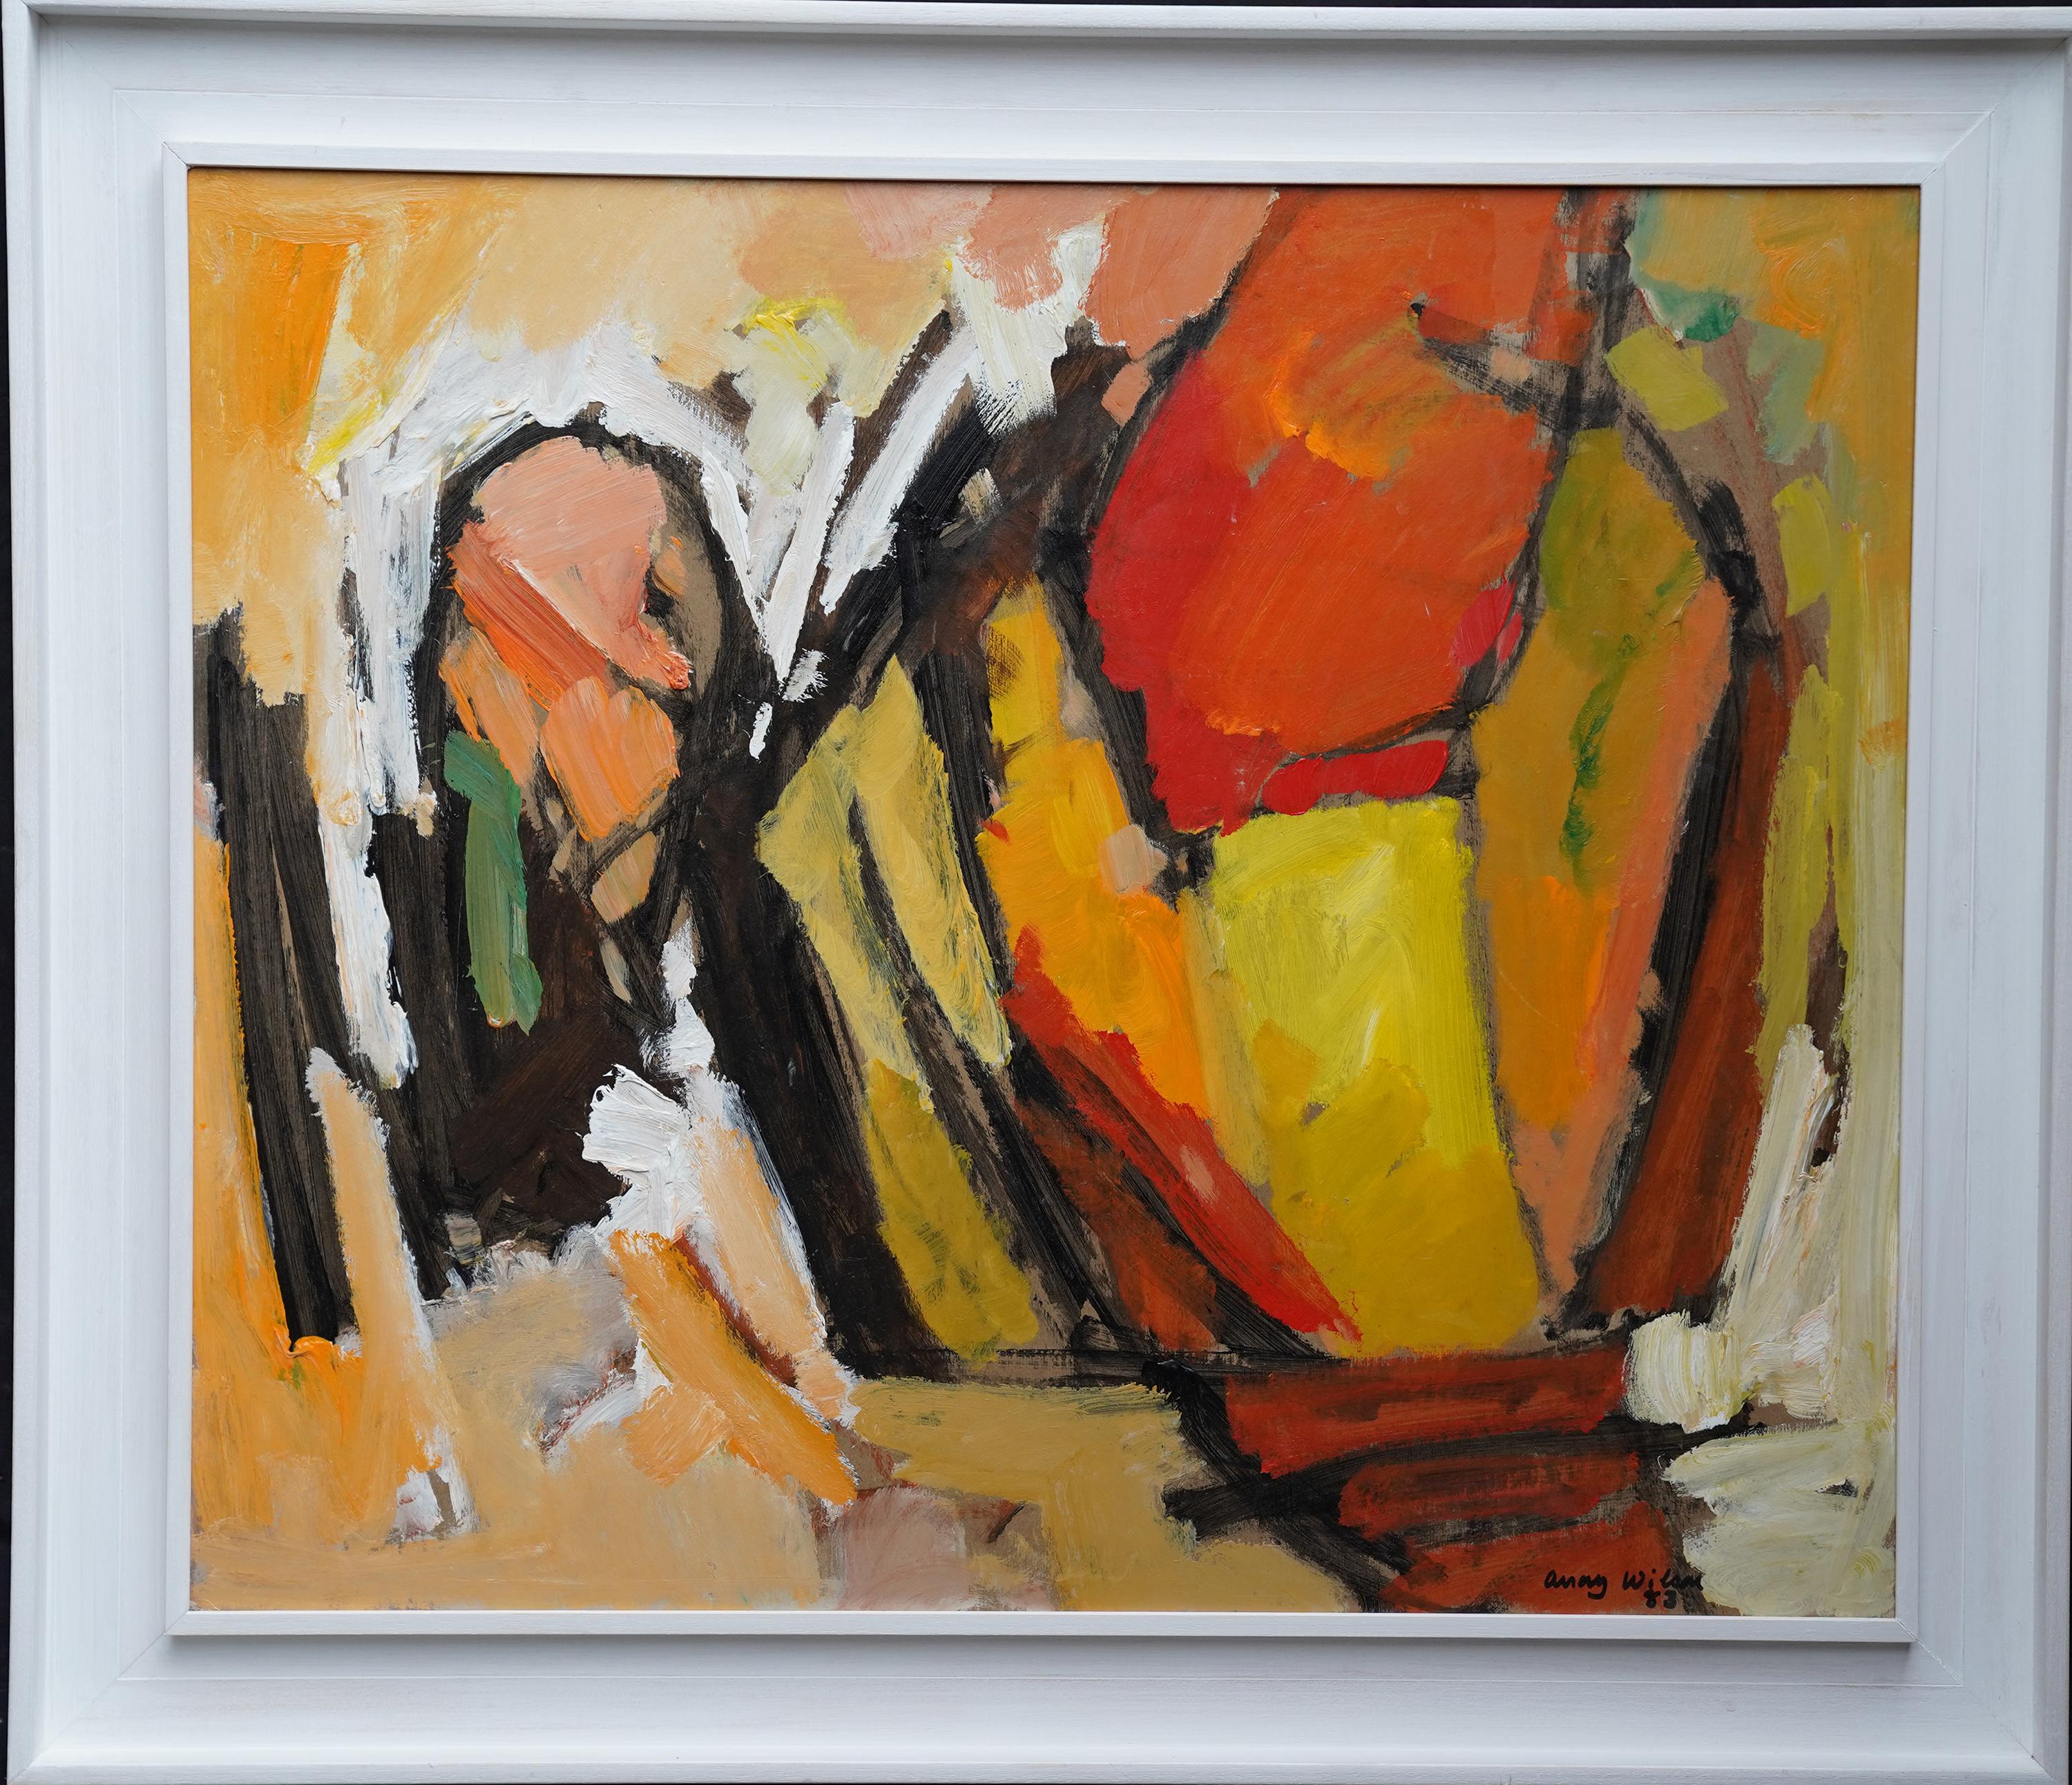 Frank Avray Wilson  Abstract Painting - Abstract '83 - Orange Yellow - British 20th century Action art oil painting